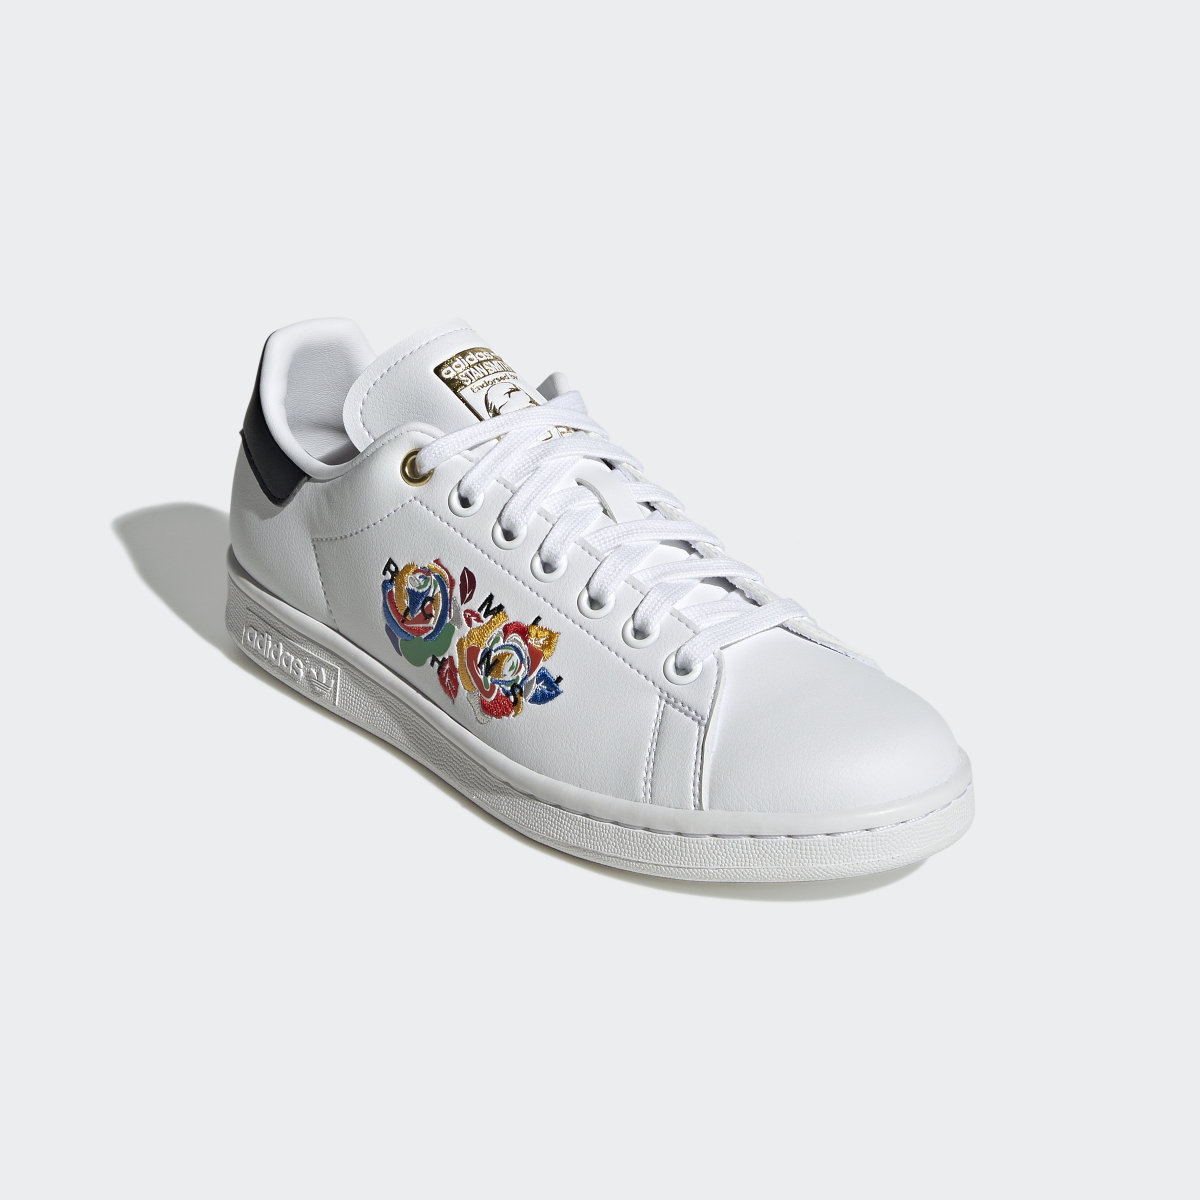 Adidas Rich Mnisi Stan Smith Shoes. 5